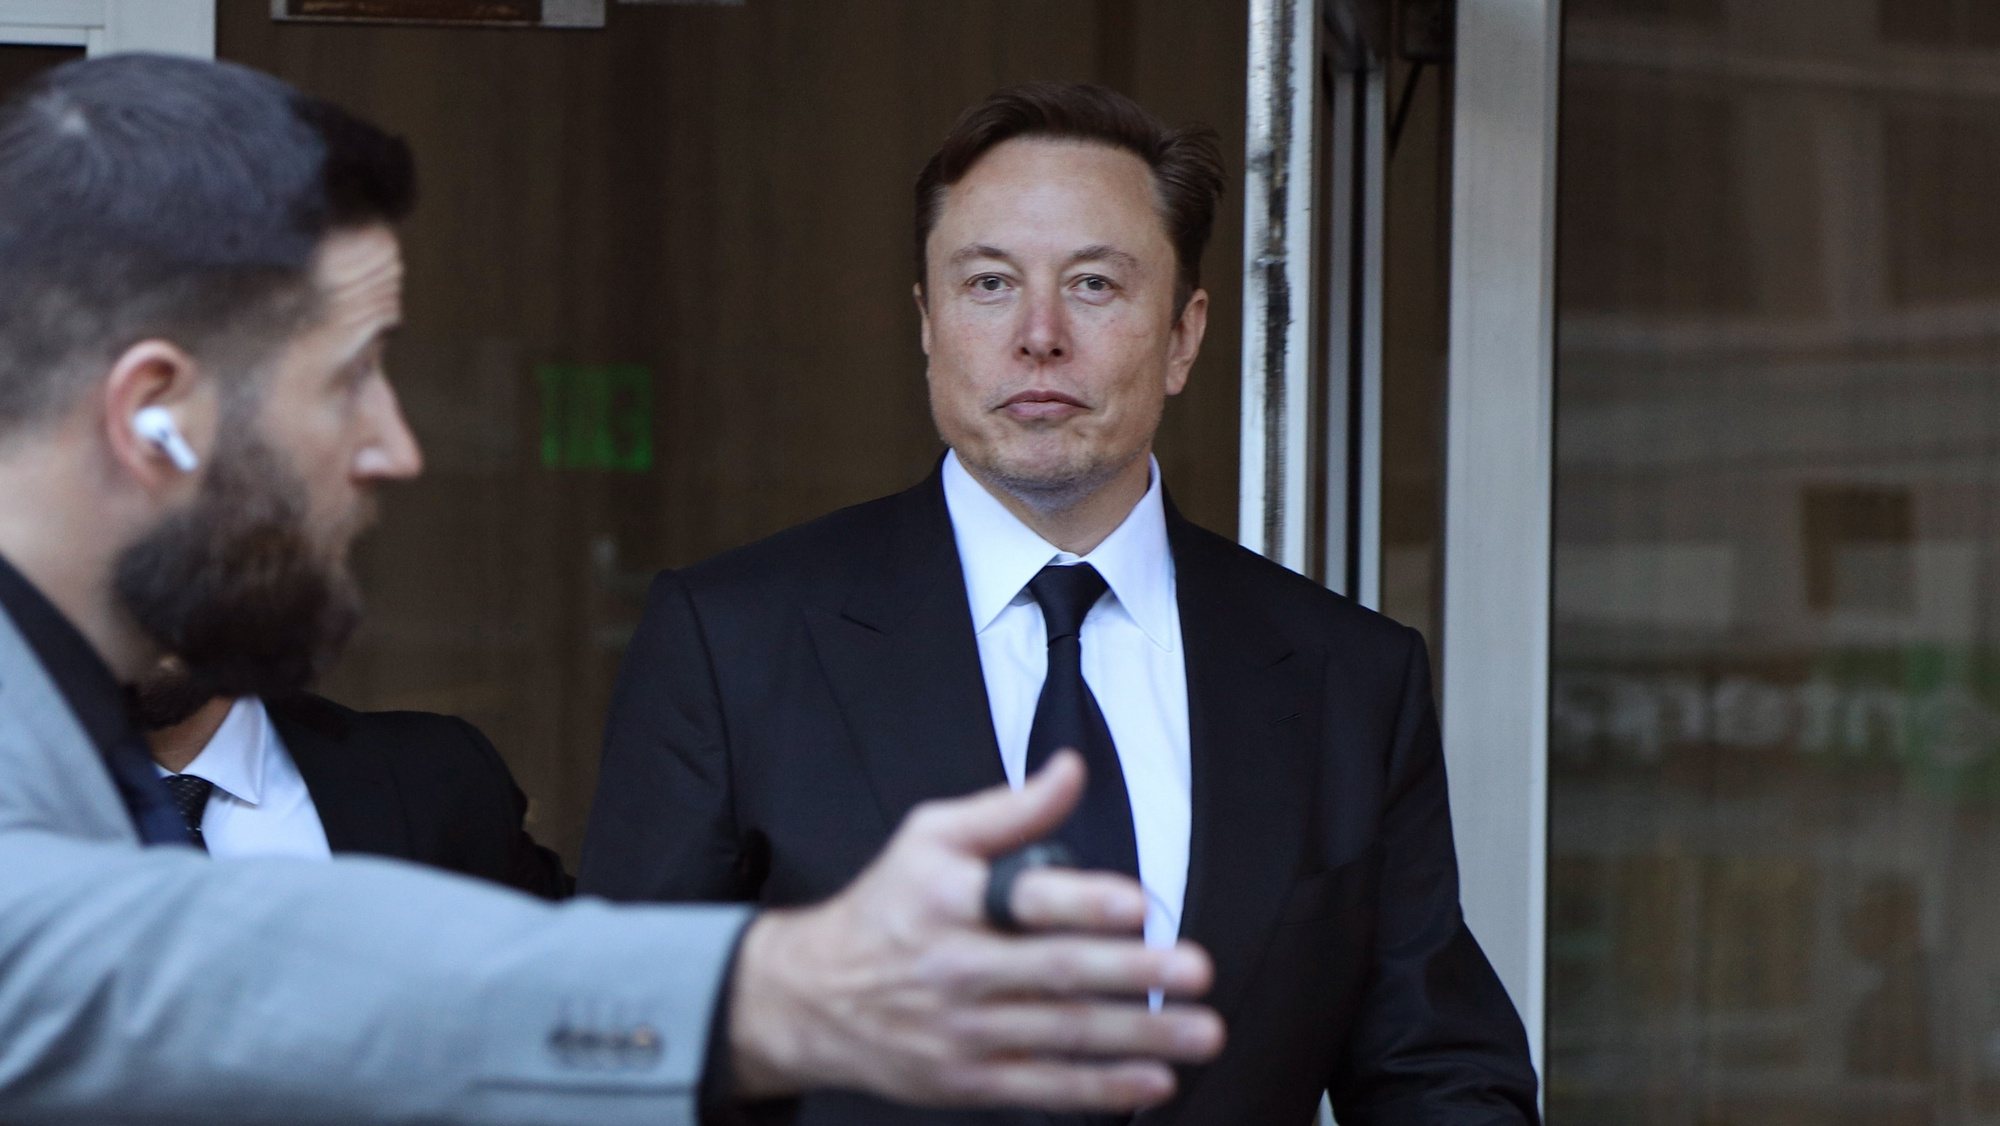 epa10427344 Tesla CEO Elon Musk leaves the Phillip Burton Federal Building and US Courthouse for the fourth day of the trial of Tesla shareholders lawsuit against Musk in San Francisco, California, USA, 24 January 2023. Tesla shareholders against CEO Elon Musk are taking him to court after he tweeted in 2018 that he could take Tesla private at 240 US dollars a share, a statement that caused volatility in the electric car company&#039;s stock price.  EPA/GEORGE NIKITIN